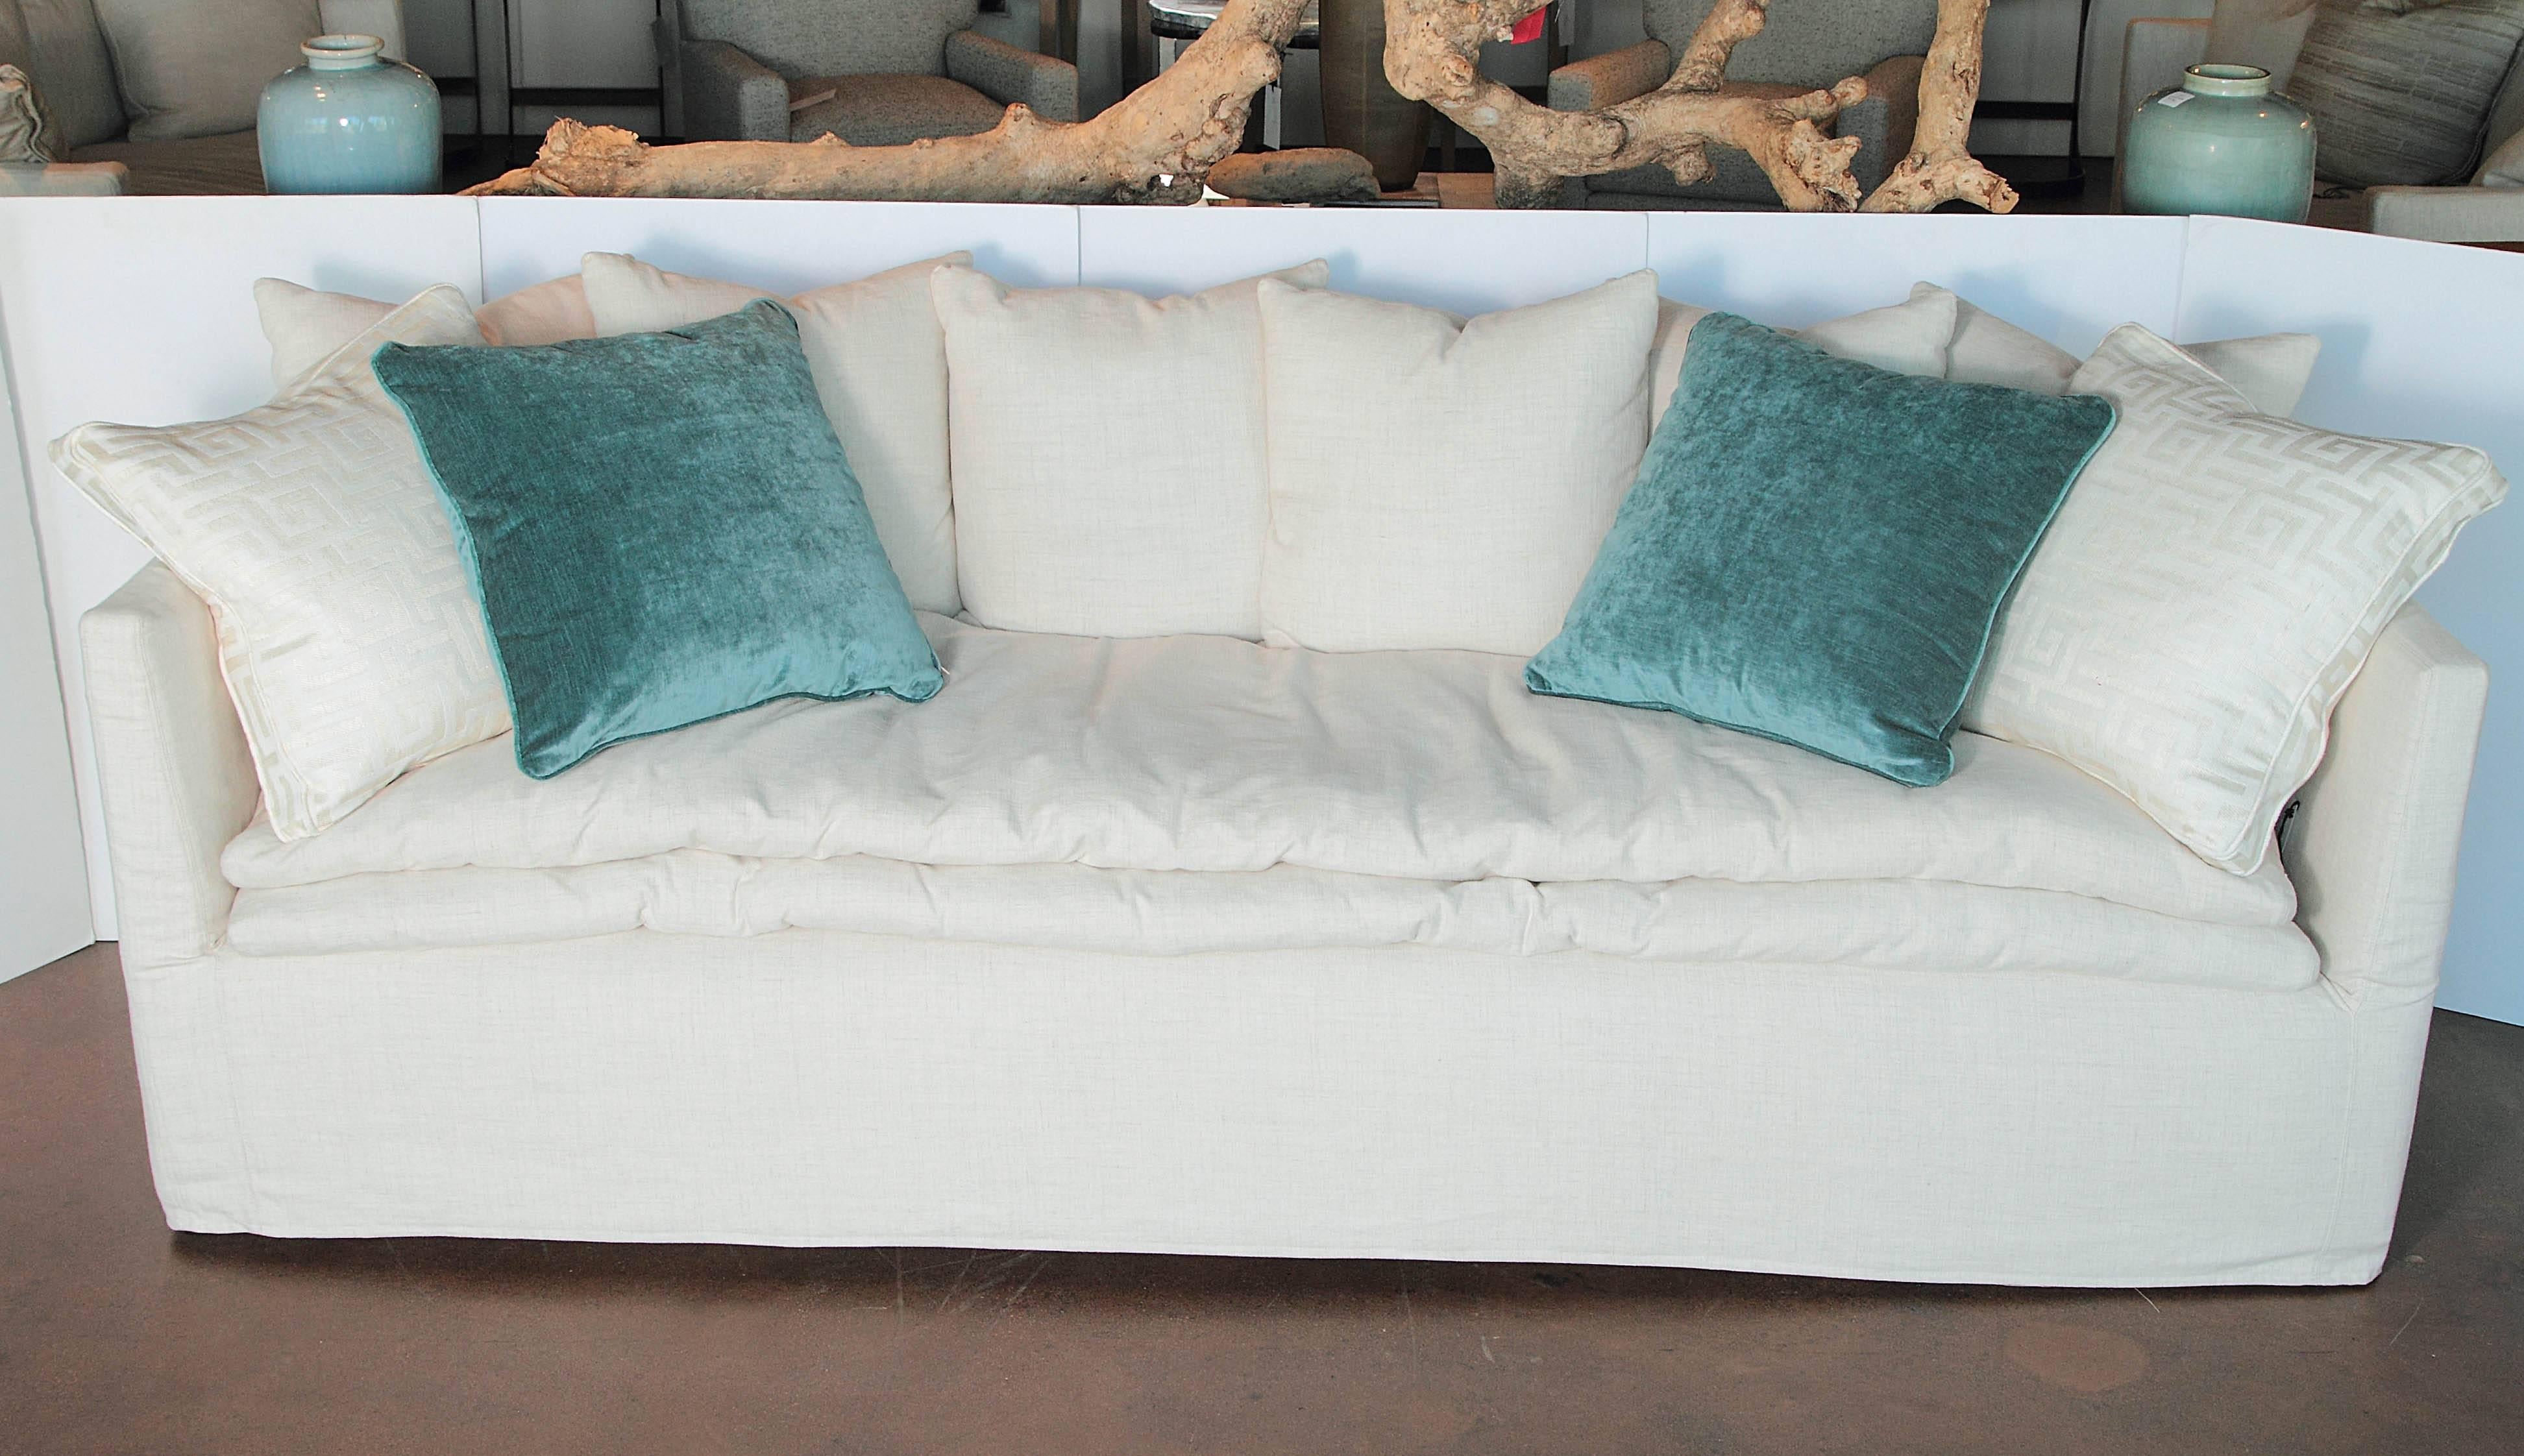 Egg shell white coverall sofa.
Brand: LEE. 

Slipped cover sofa with extra cushion added. Including six pillows. Cushion down pillow top. Finish is fruitwood.

Fabric is 